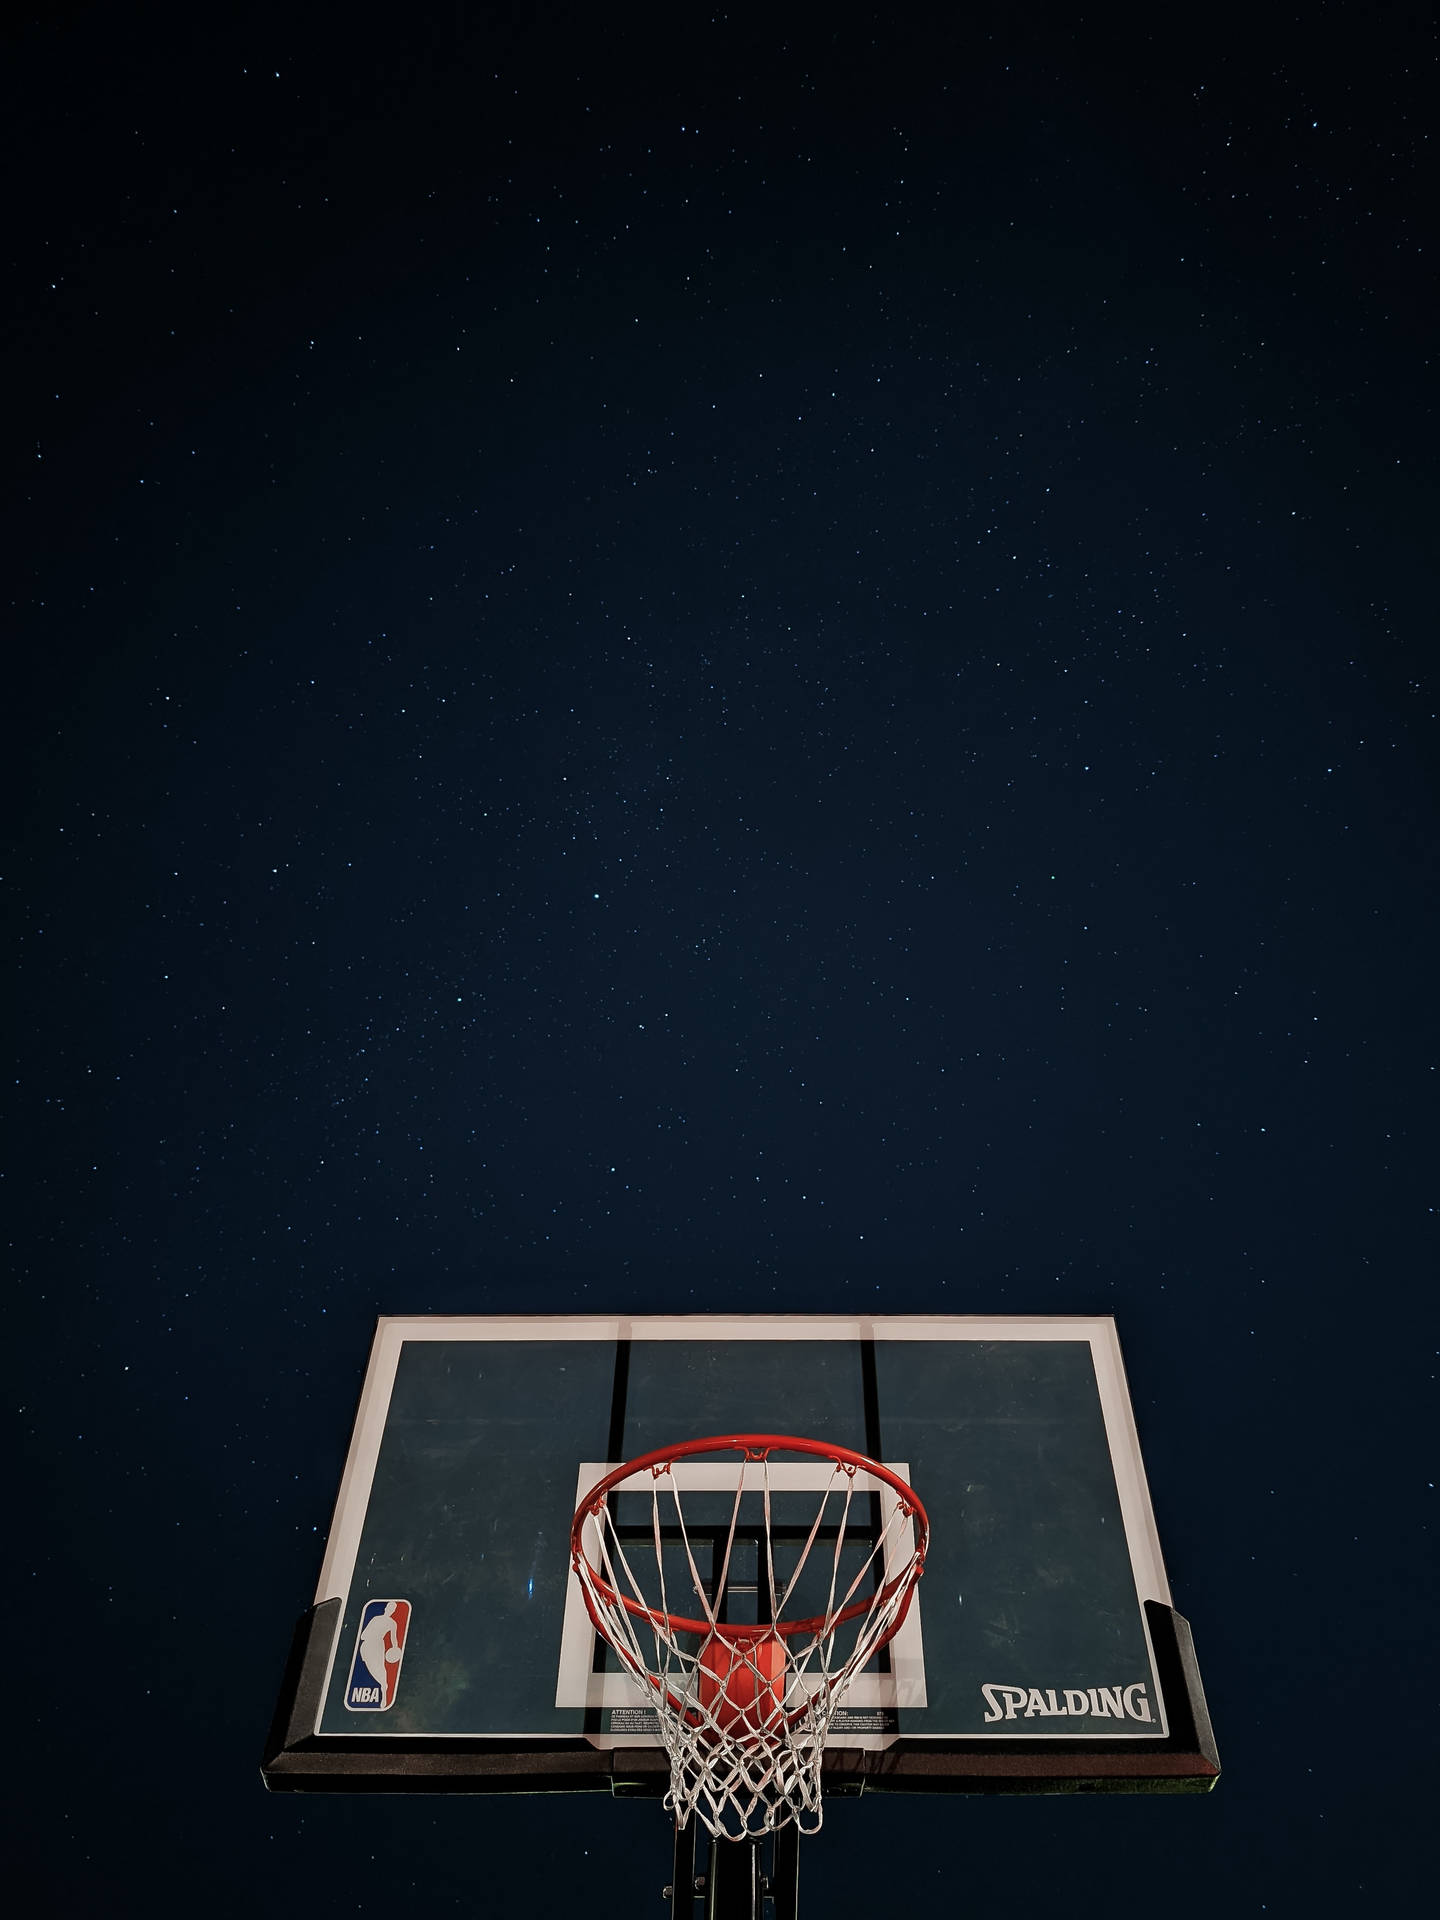 Hd Basketball Ring In Night Sky Background